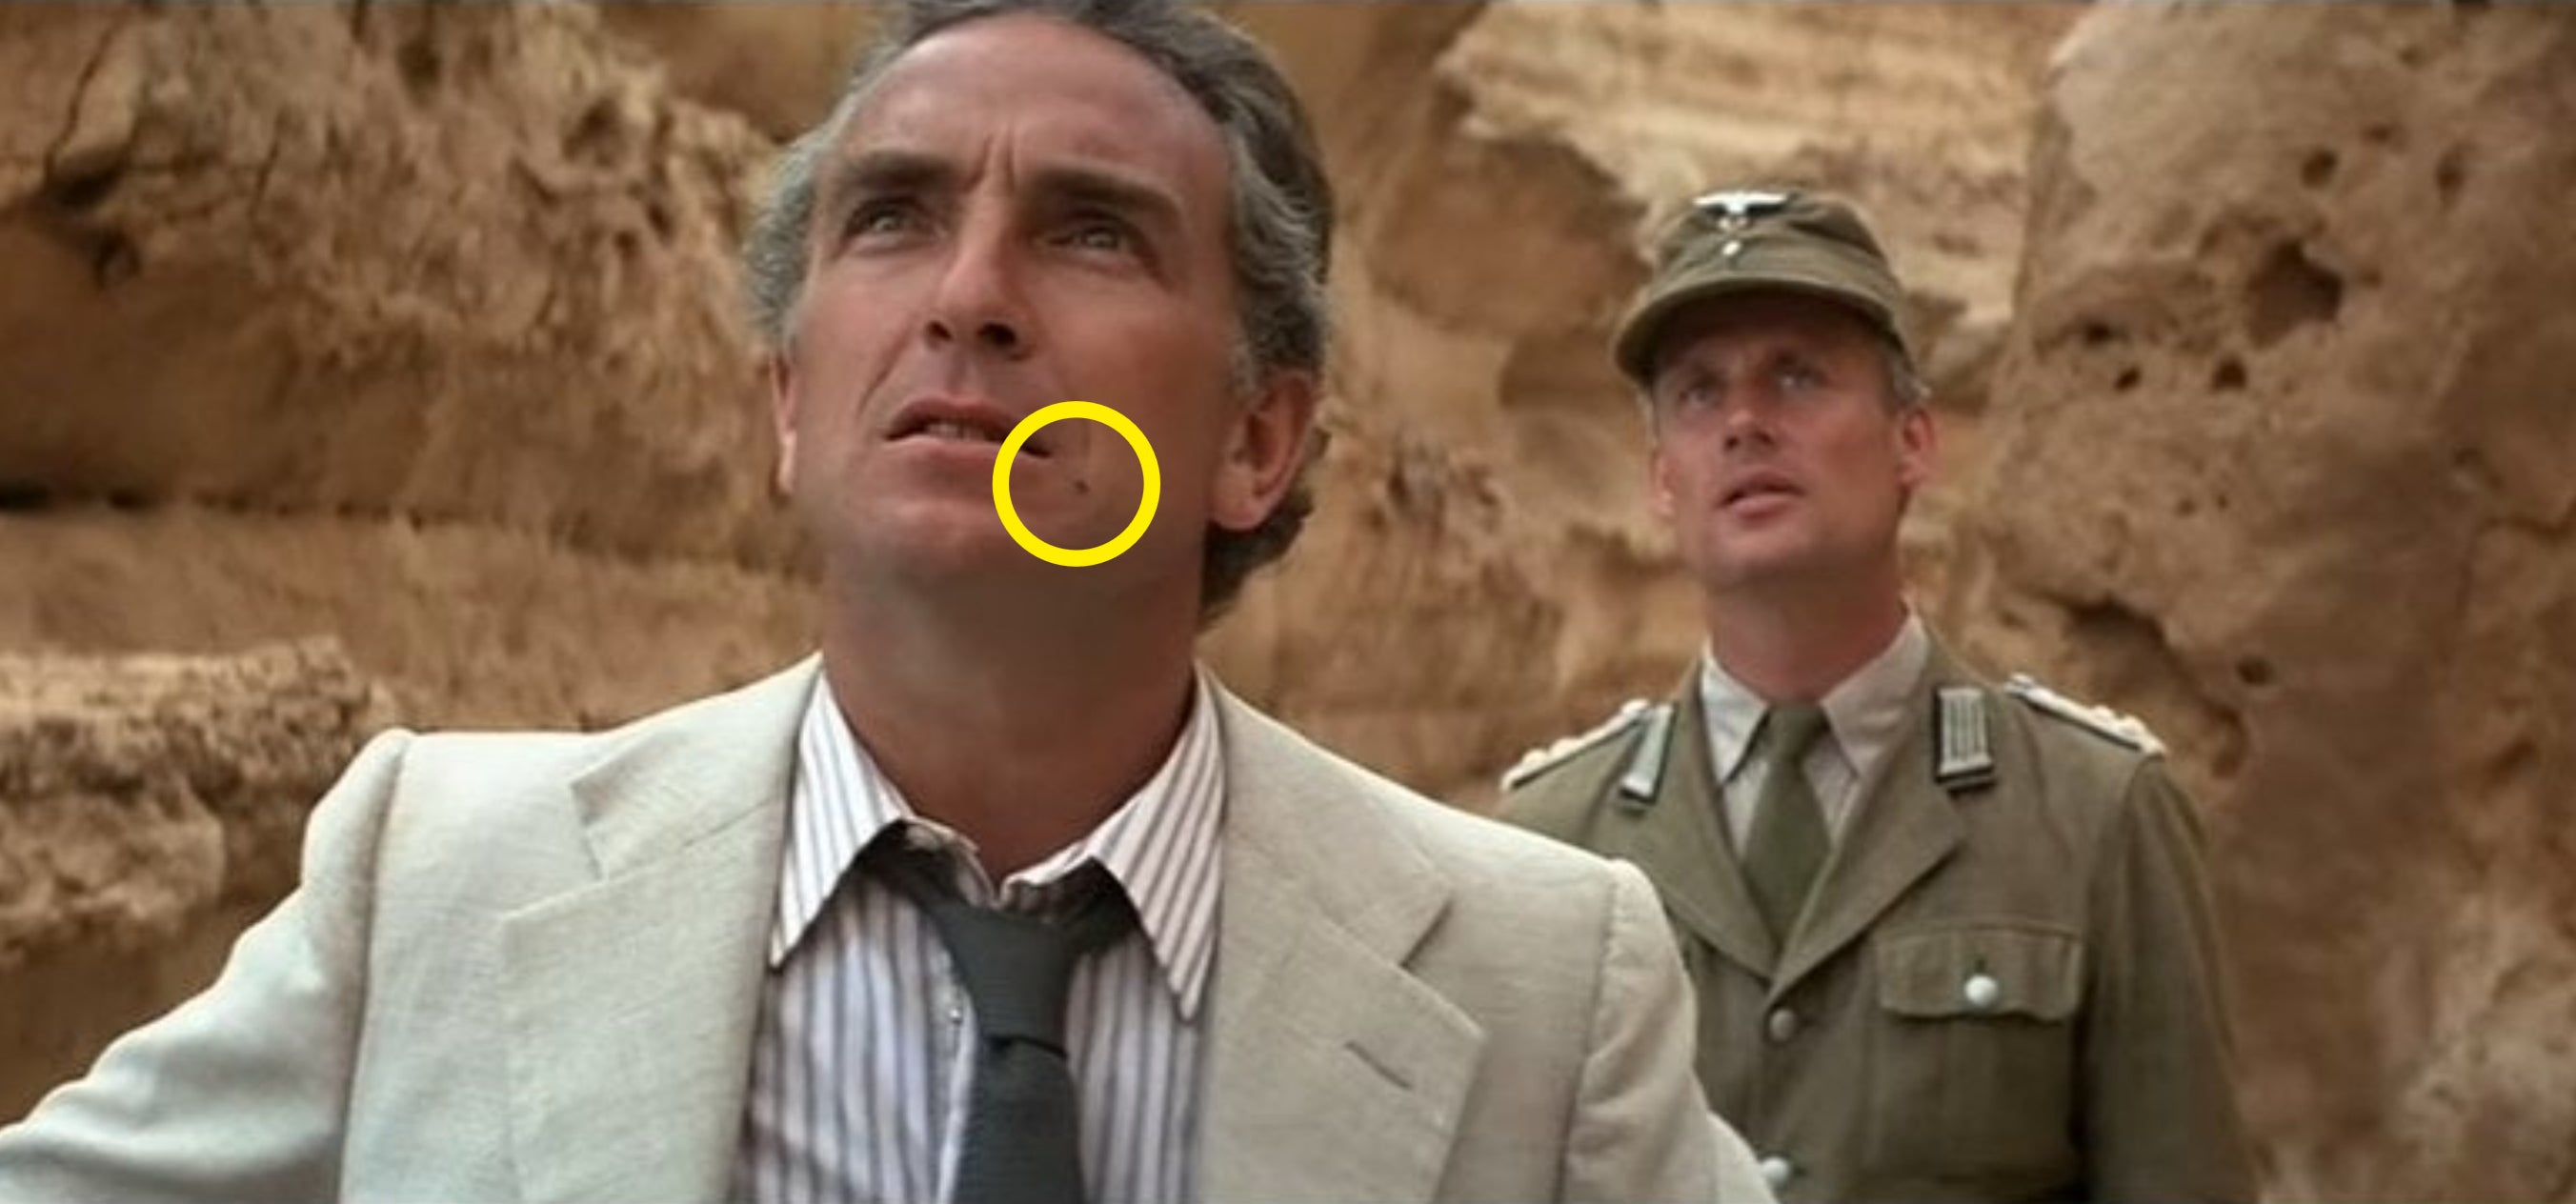 René Belloq with a fly on his face in &quot;Raiders of the Lost Ark&quot;